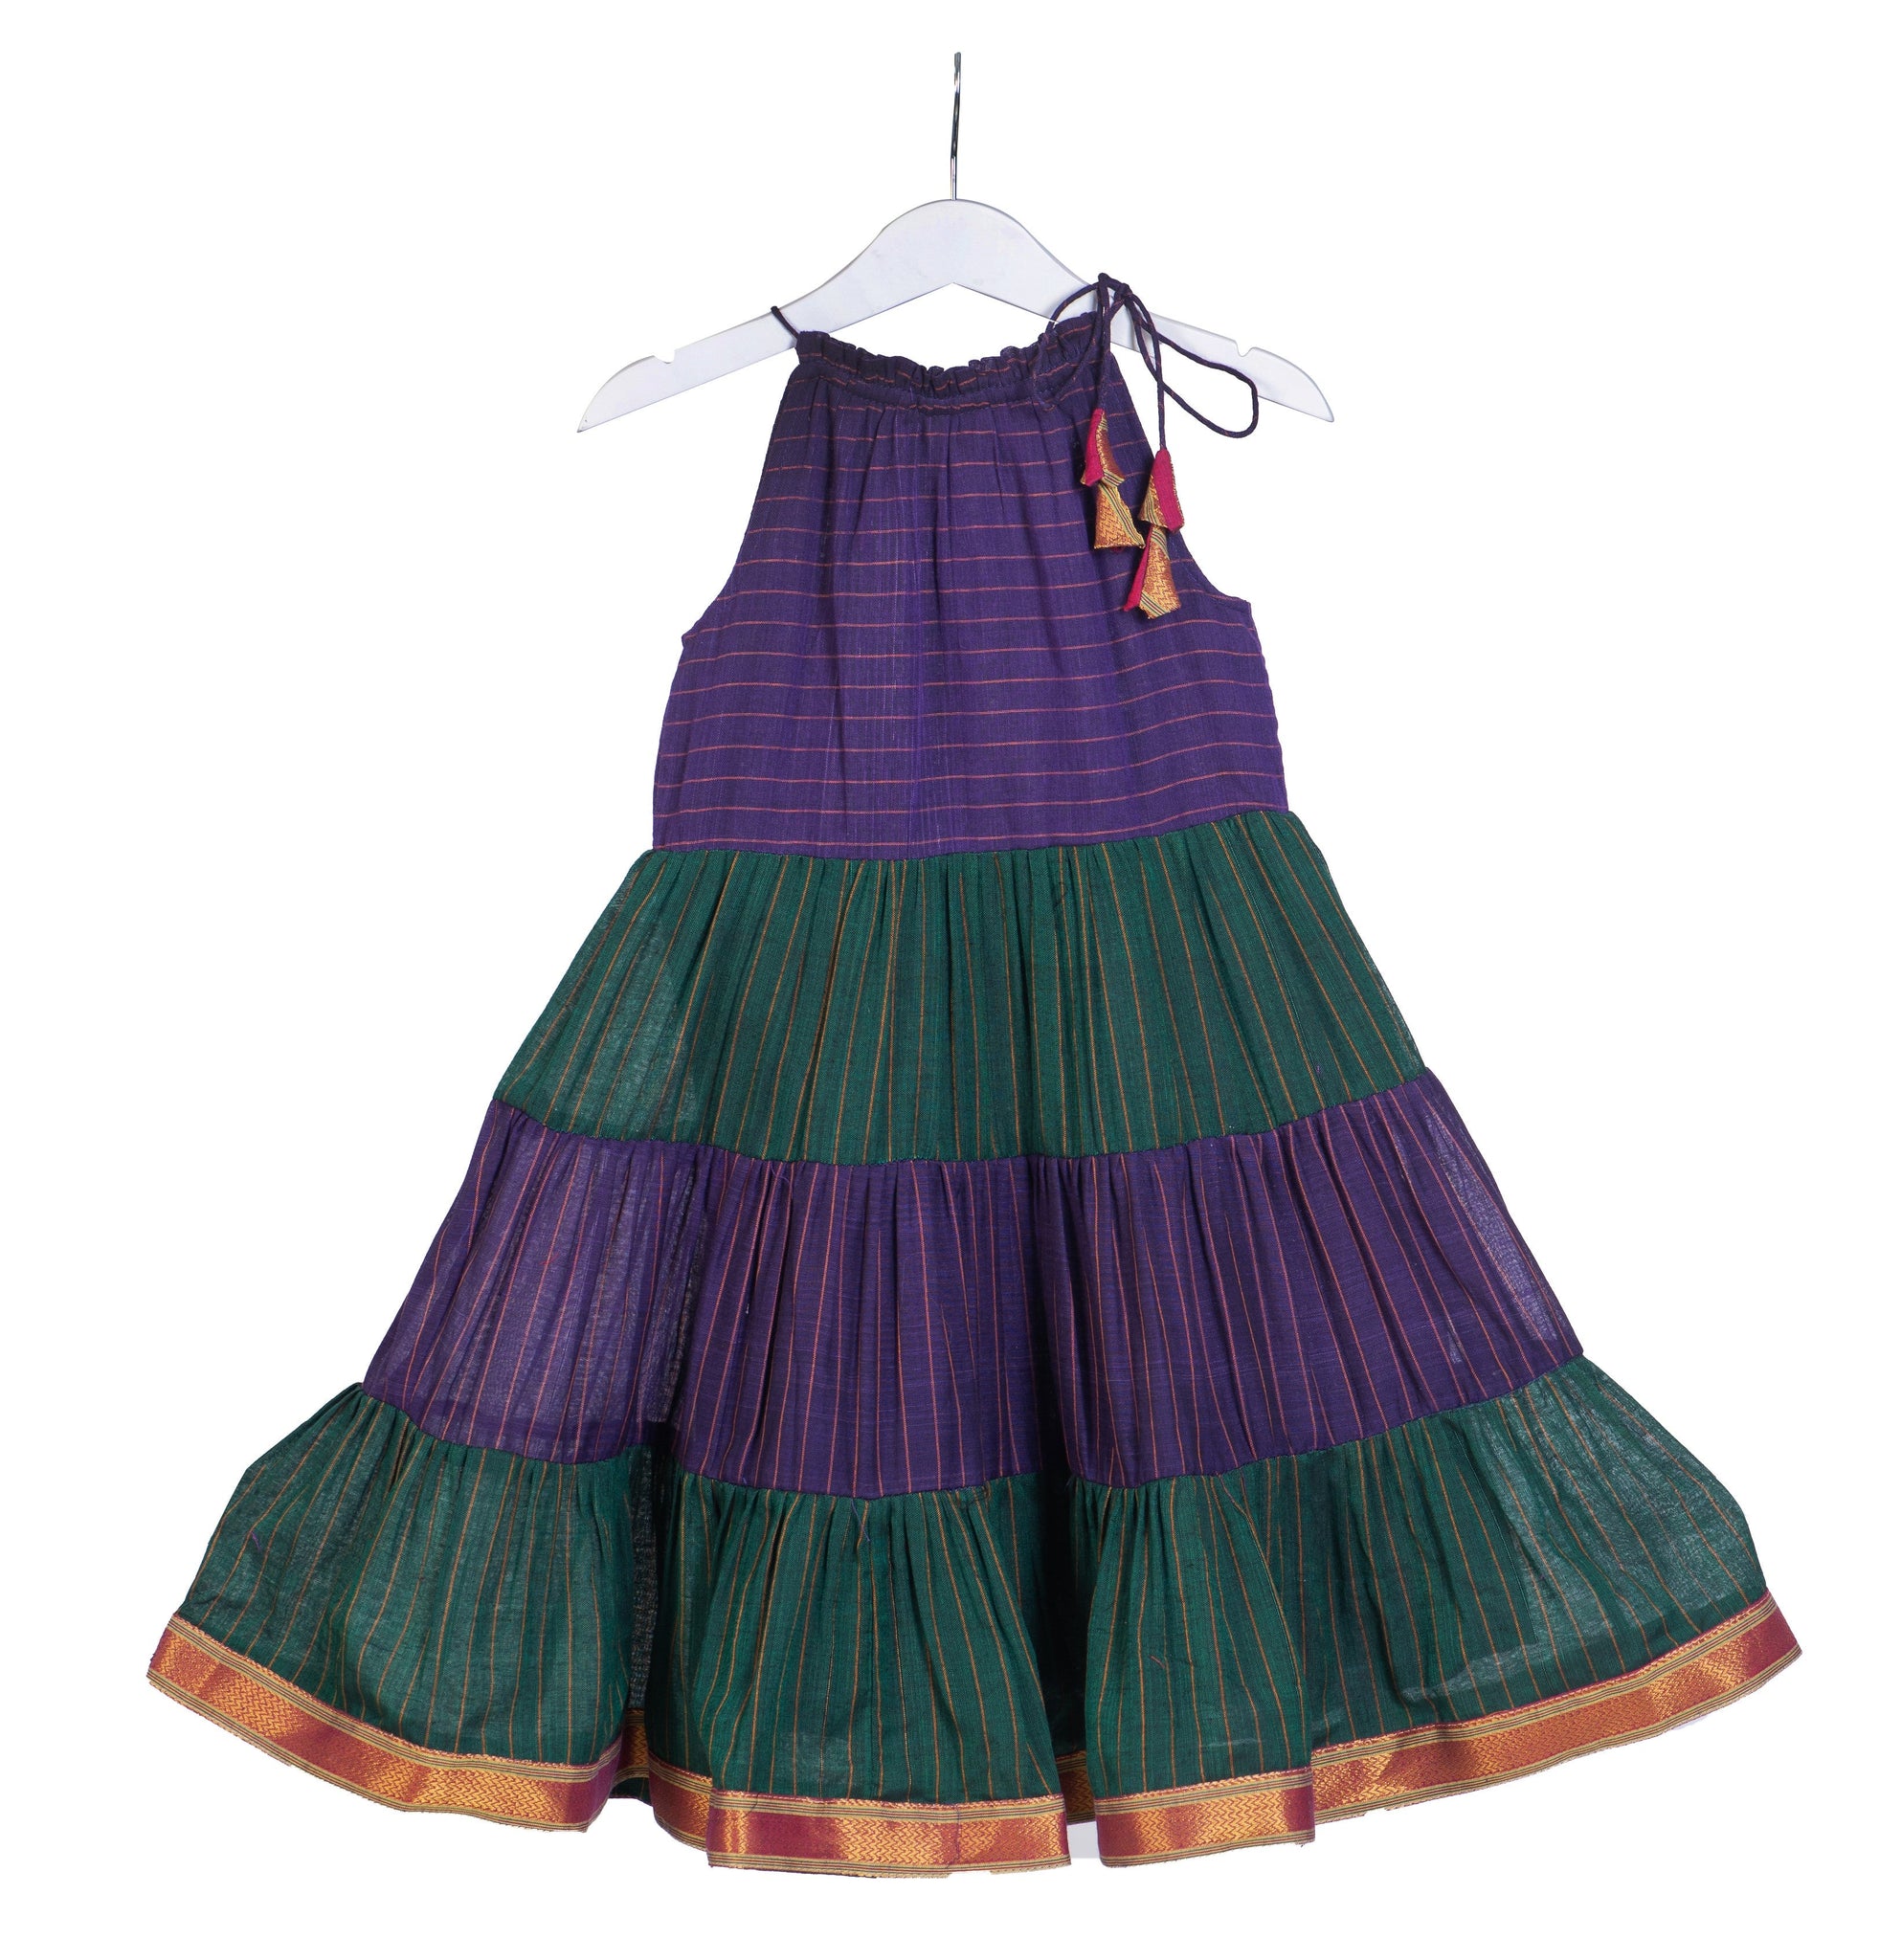 Green and Violet Frilly Dress